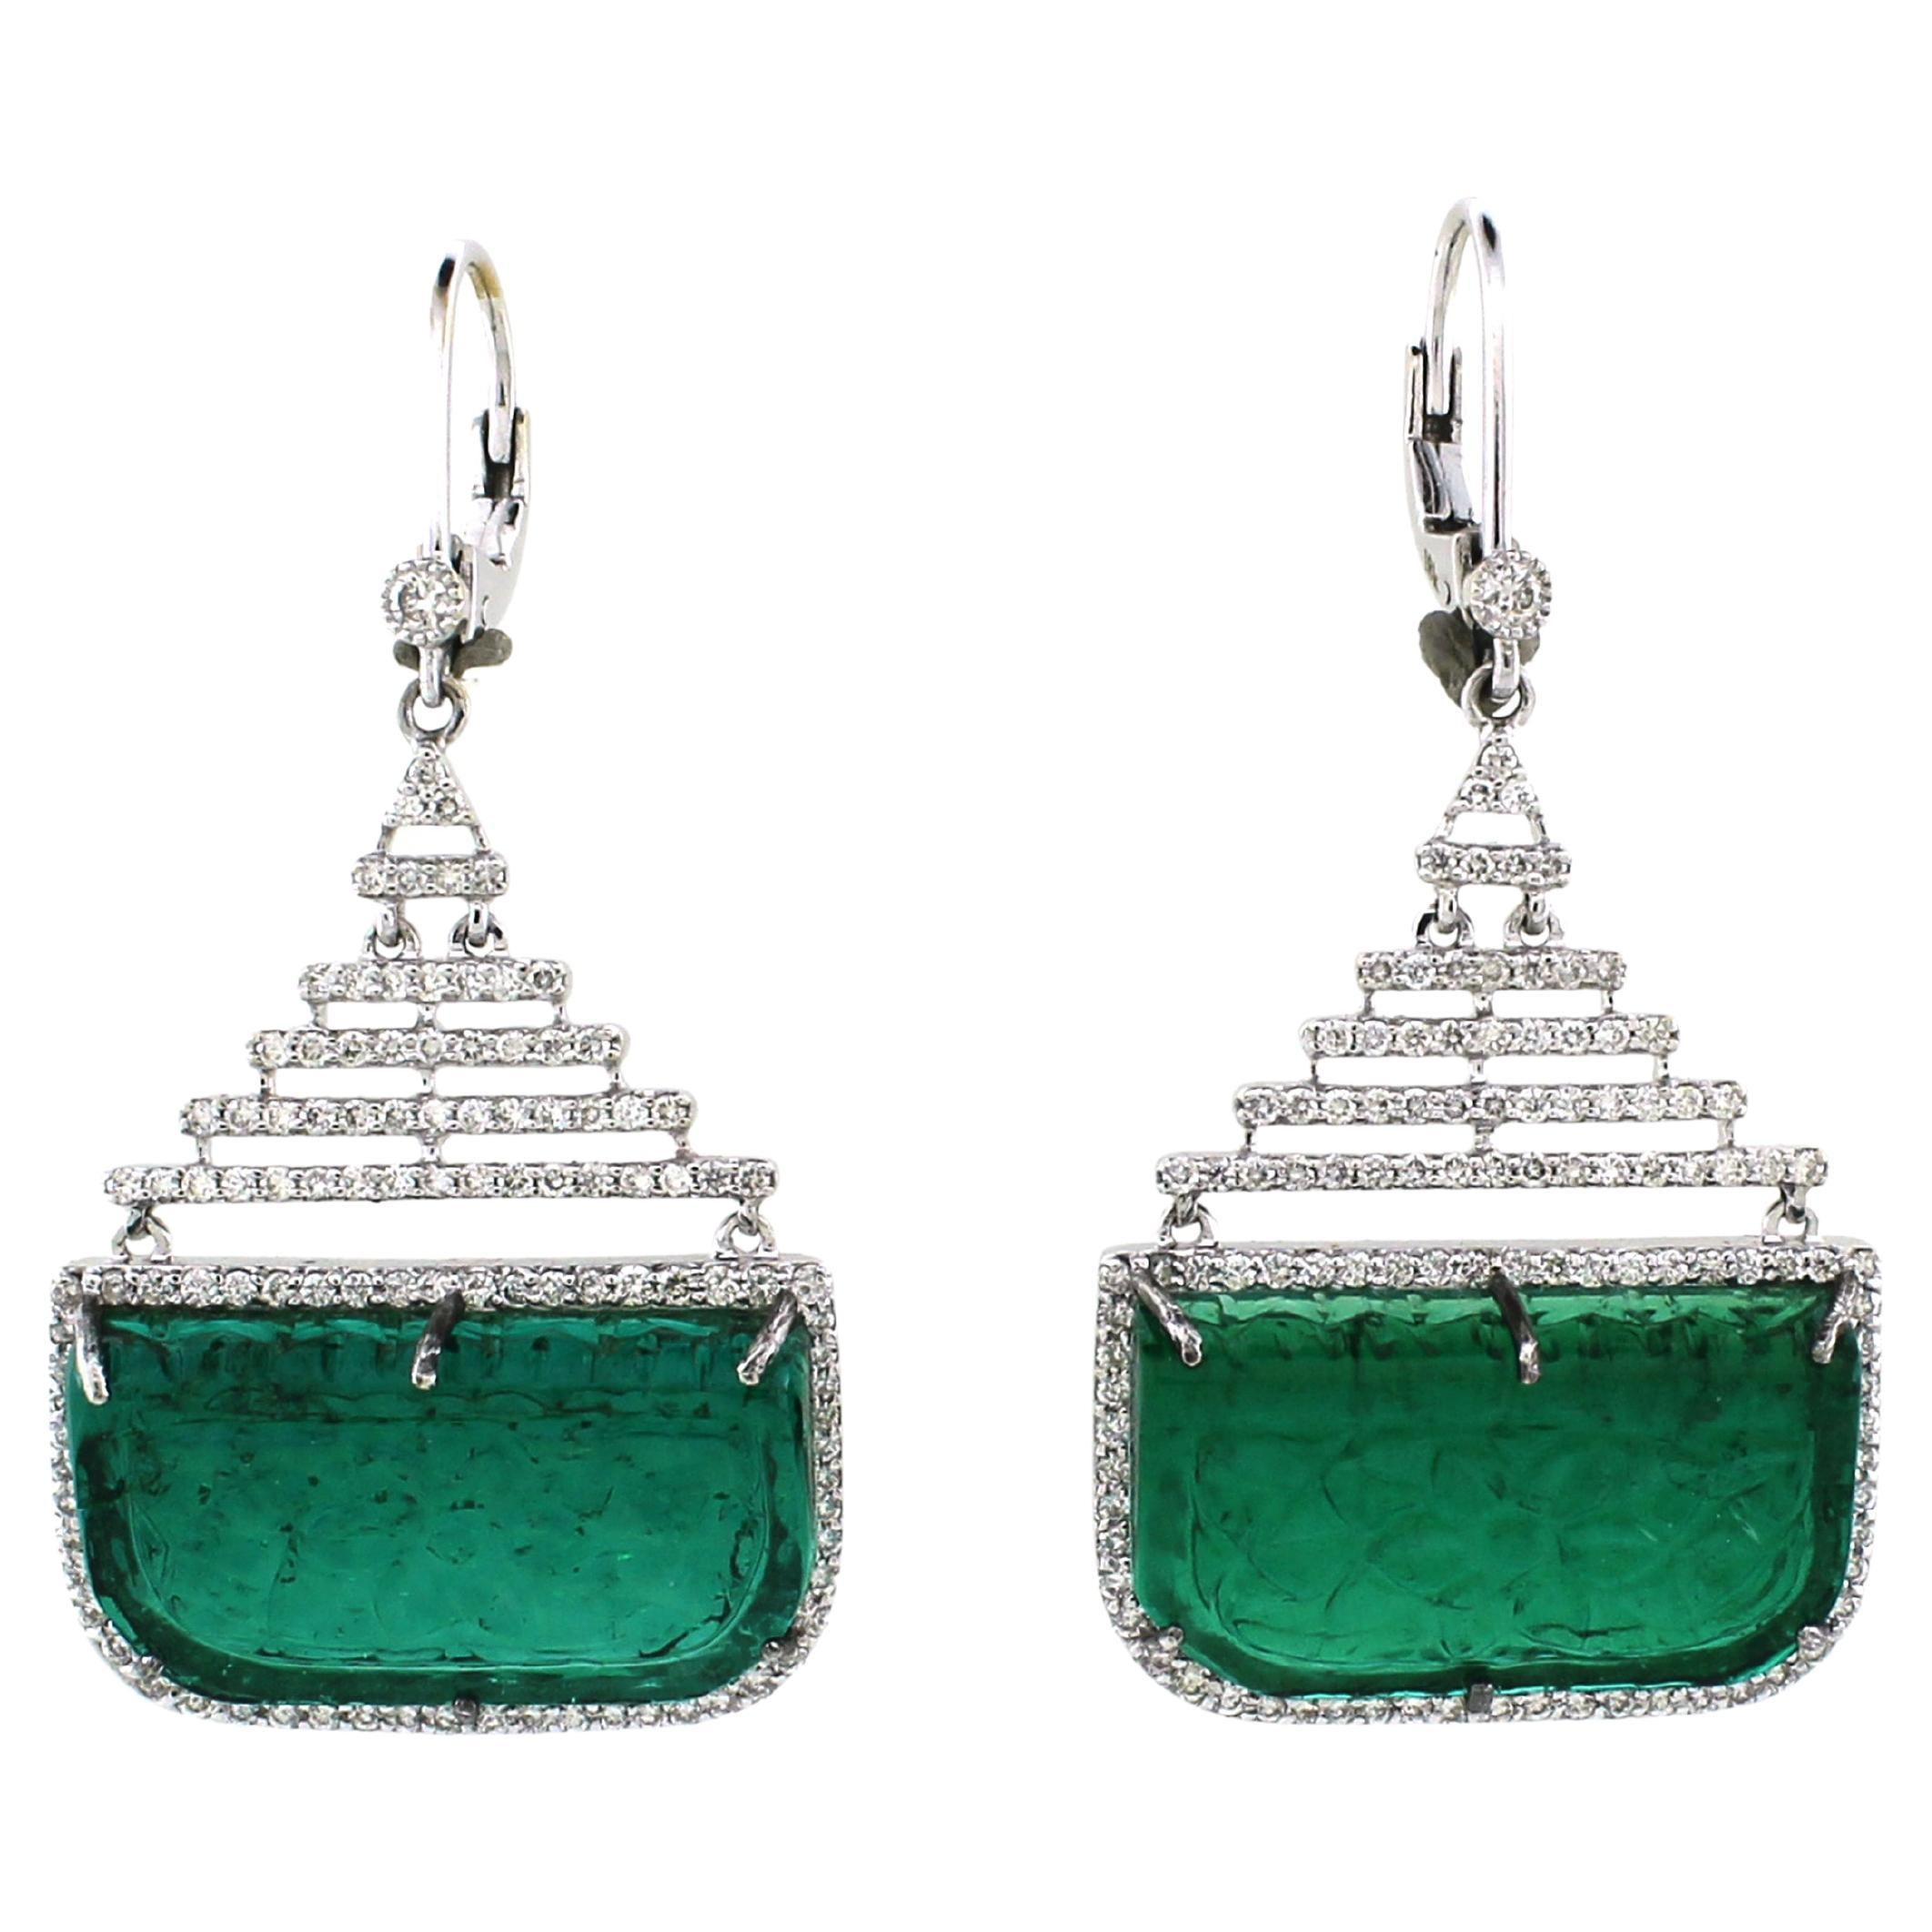 21.45 carats of Emerald Earrings For Sale